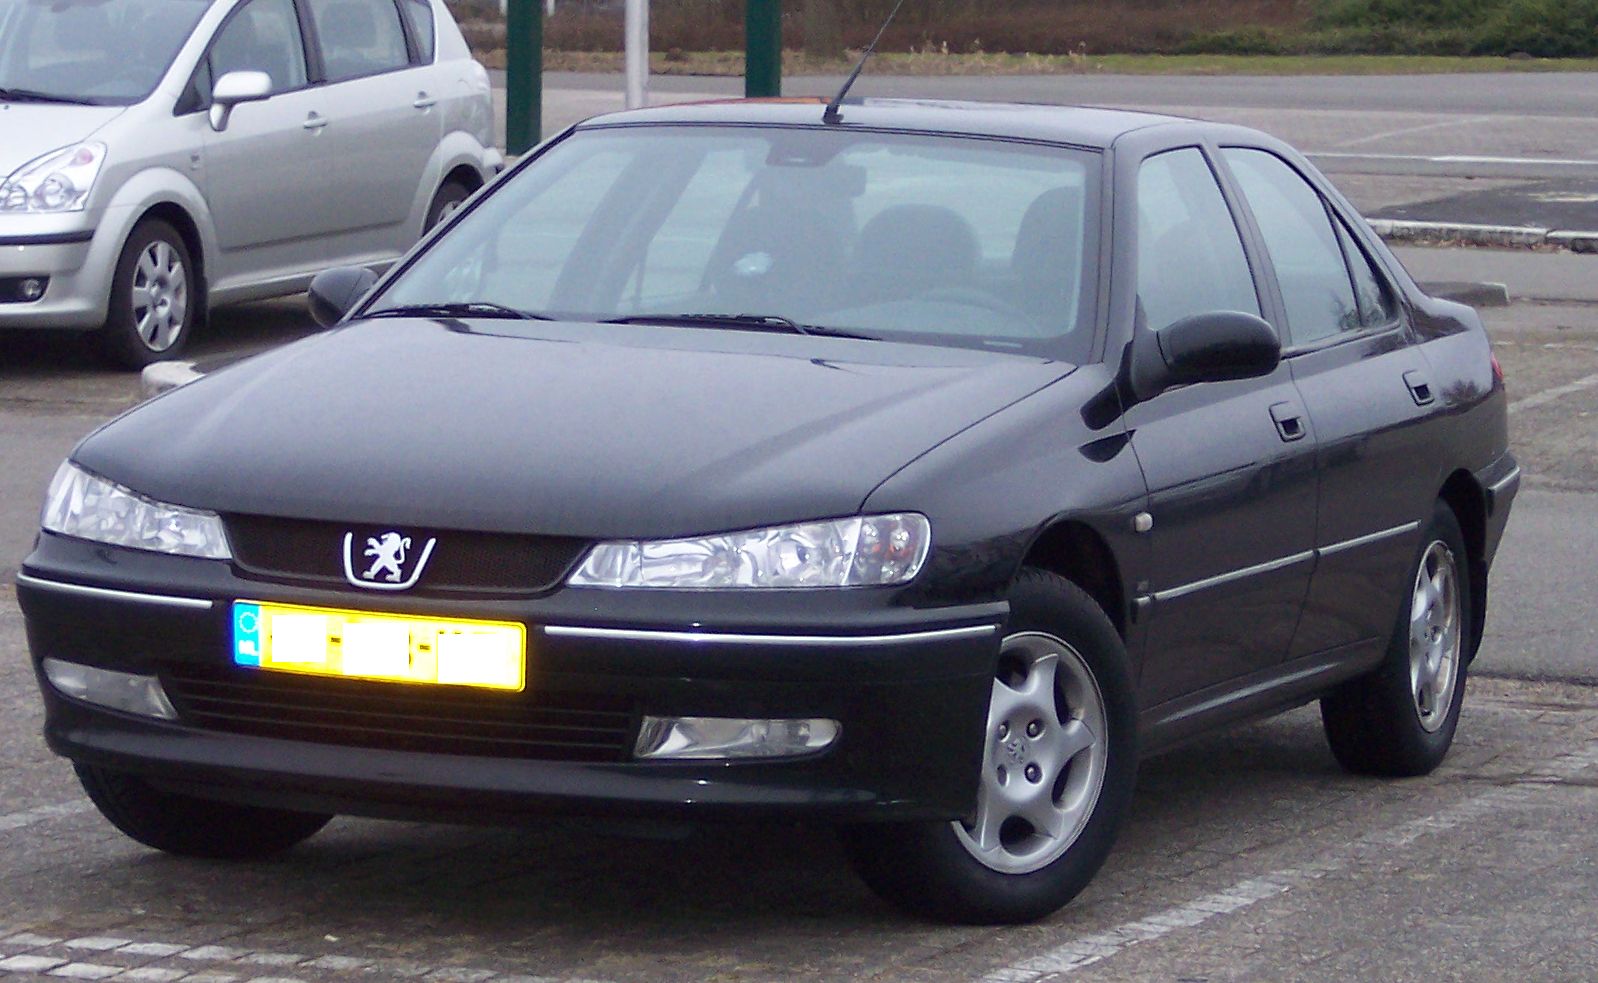 Peugeot 406 2007 Review, Amazing Pictures and Images